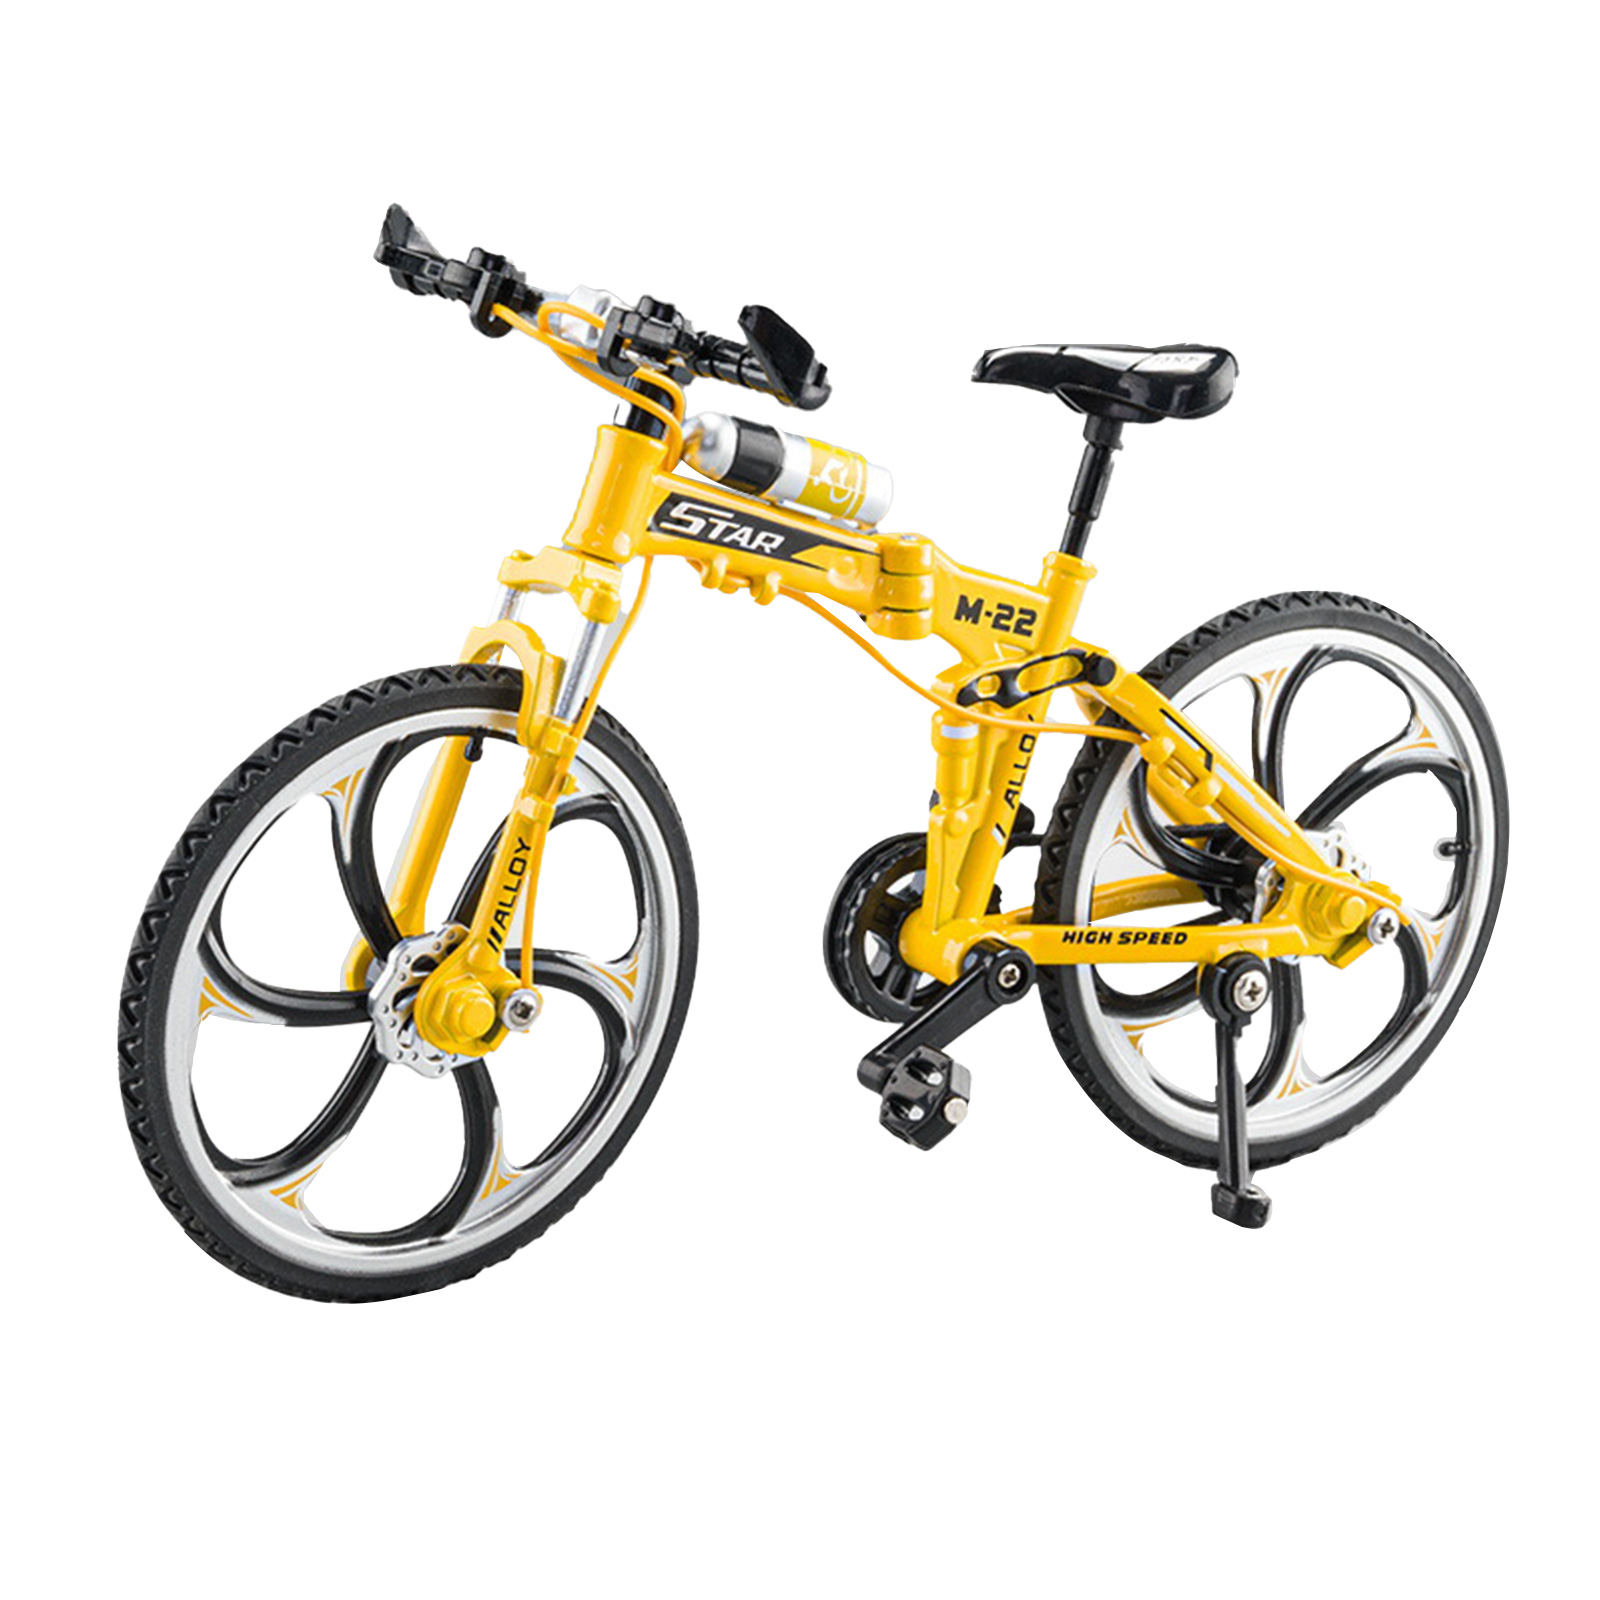 1/8 Alloy Mountain Bike Model Simulation Sliding Steering Mtb Bicycle Toys For Children Gifts Collection yellow